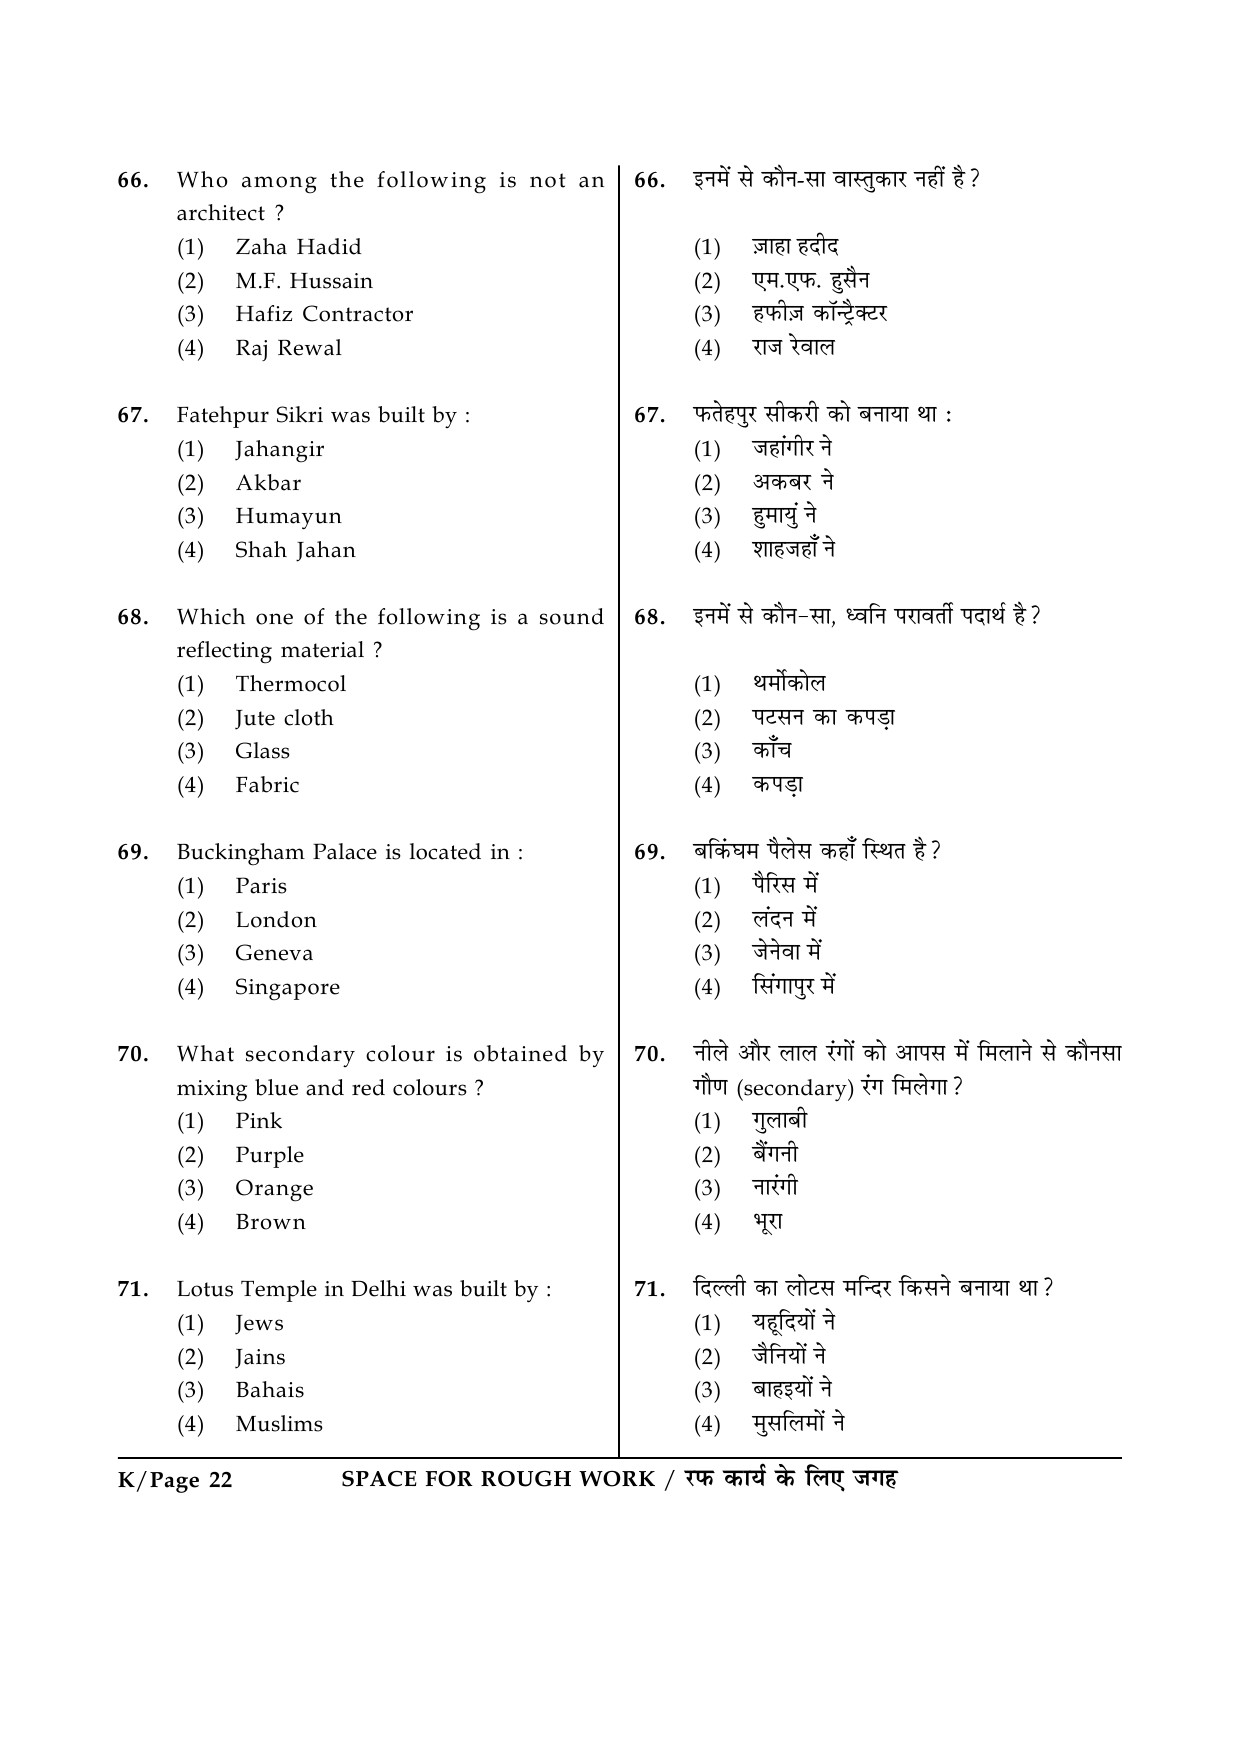 JEE Main Exam Question Paper 2015 Booklet K 22